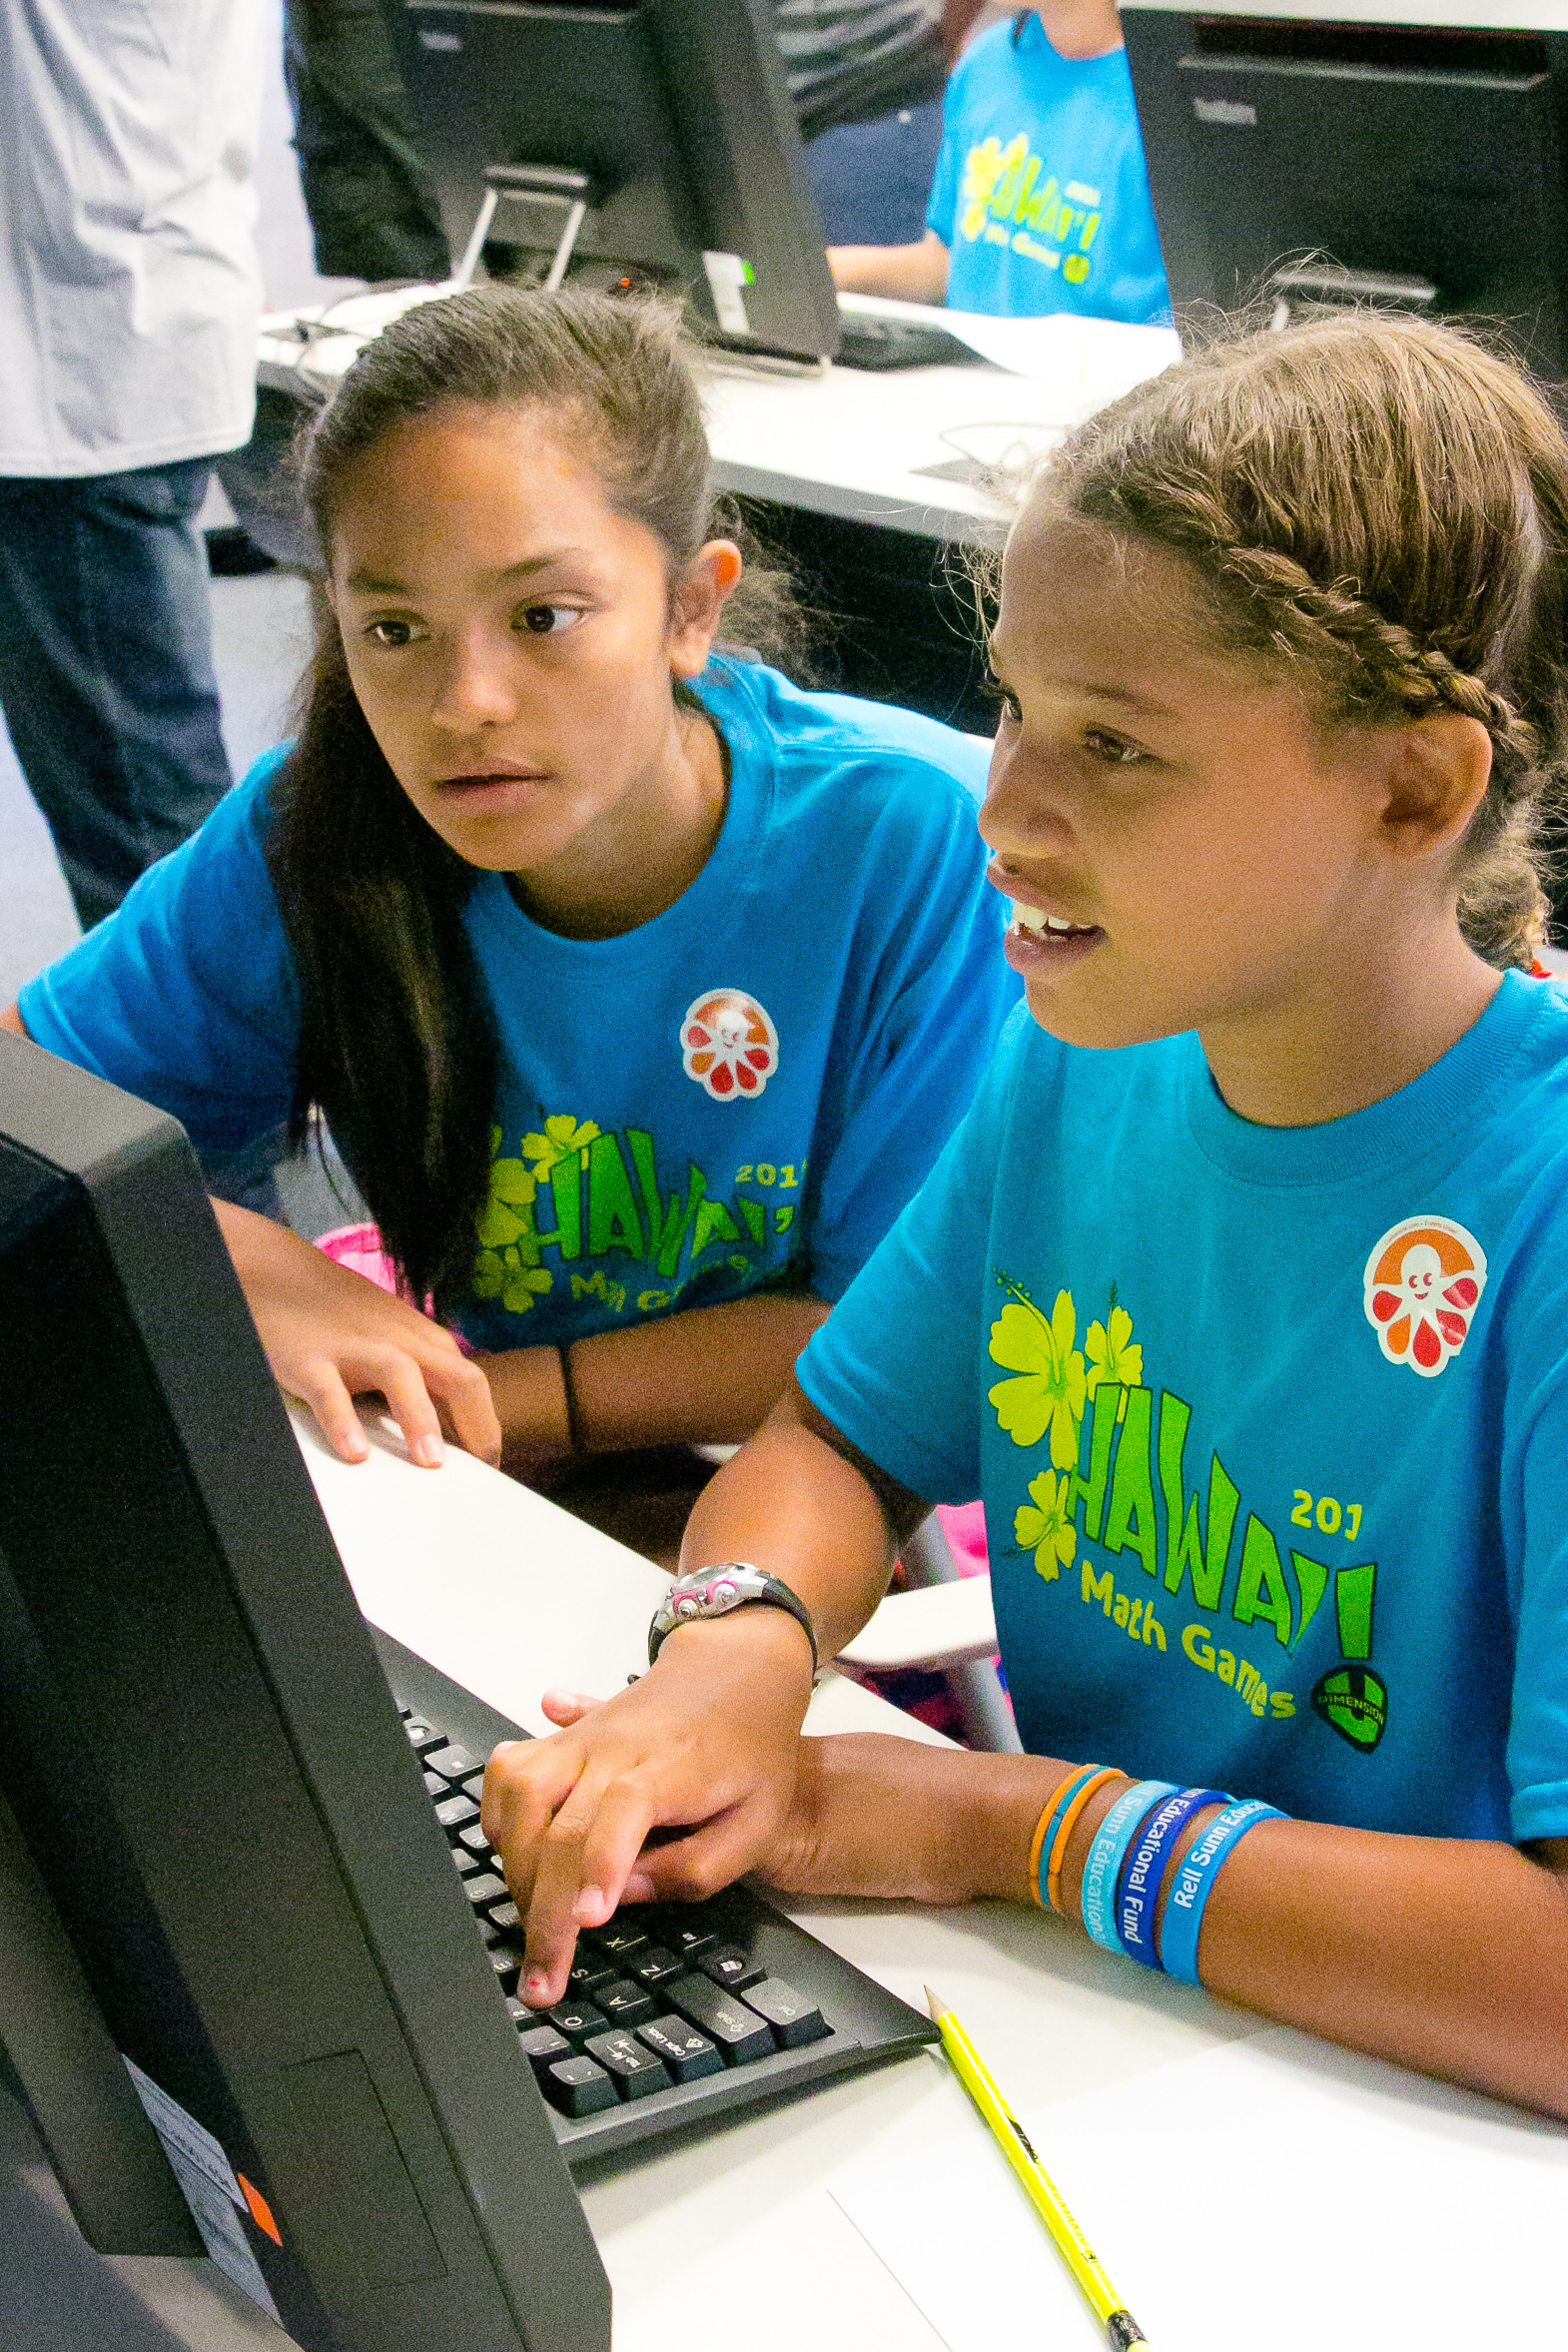 Students participating in the Hawai'i Math Games